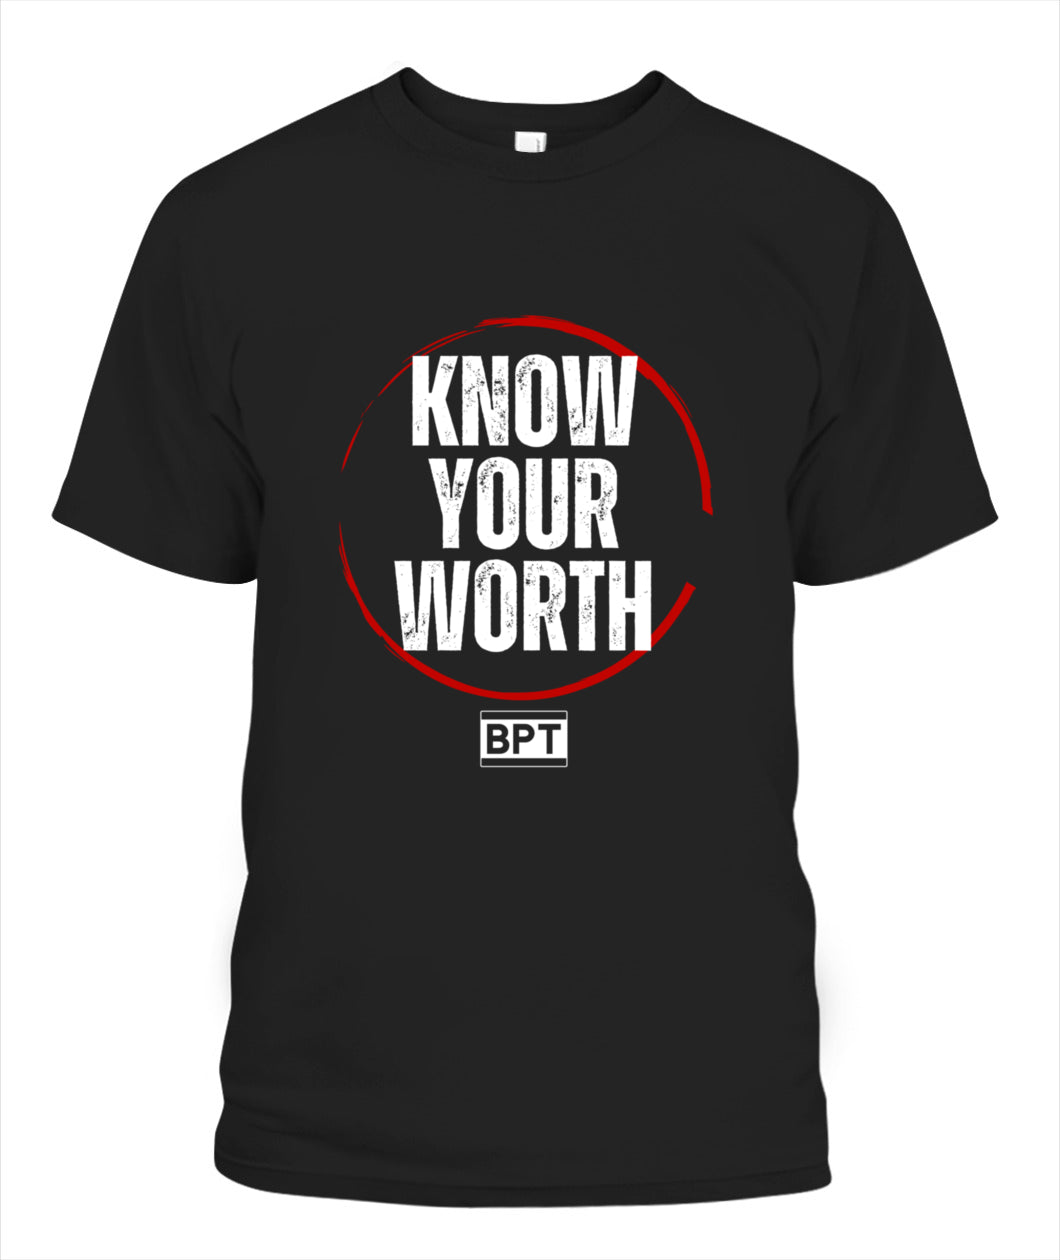 KNOW YOUR WORTH T-SHIRT